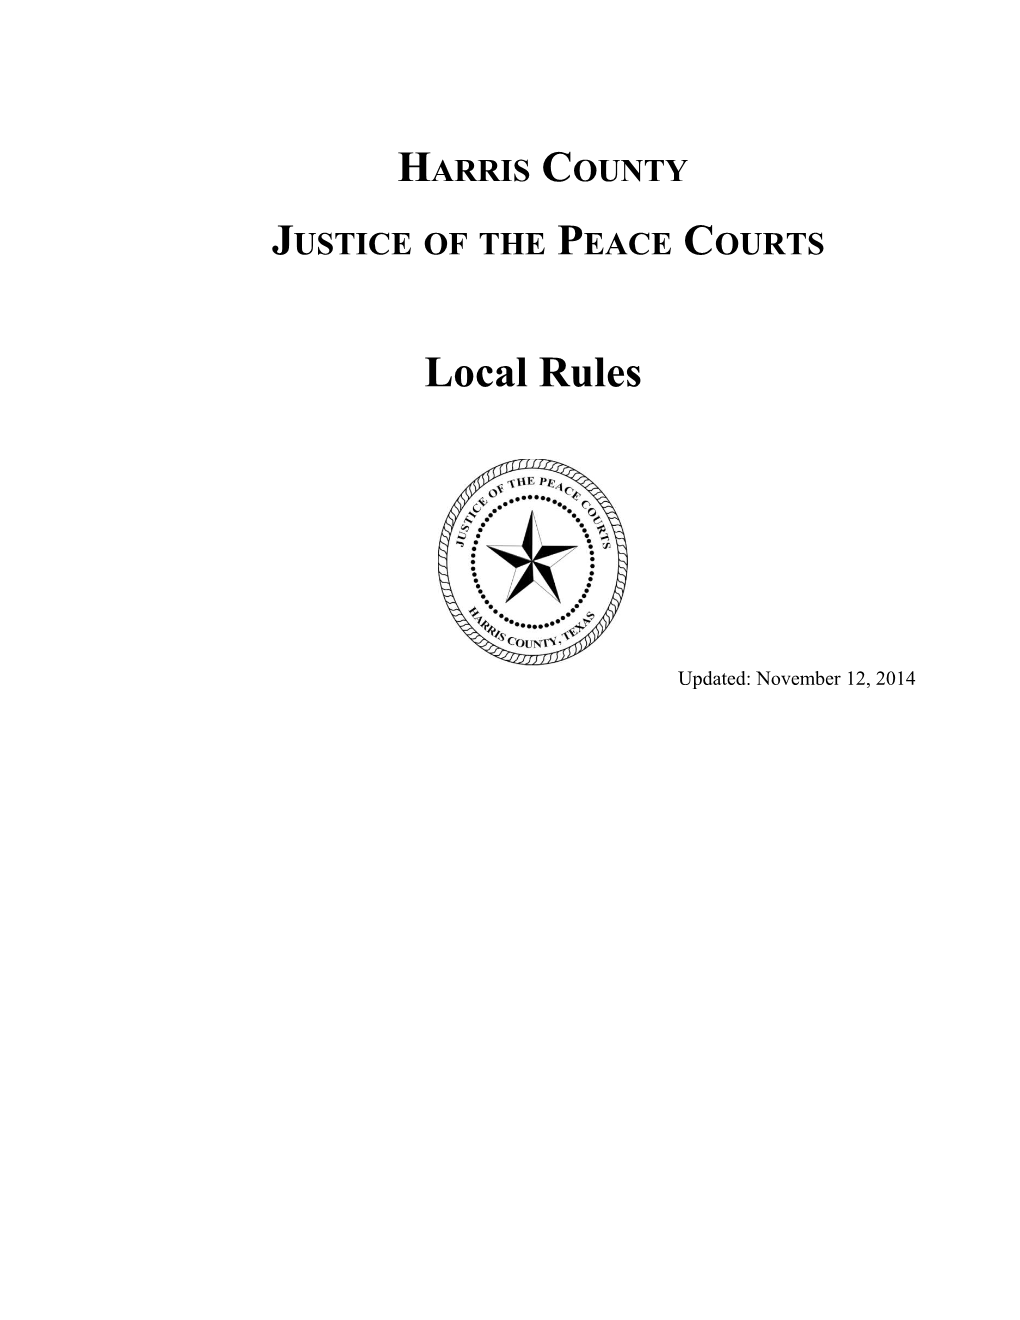 Local Rules of the Harris County Justice of the Peace Courts